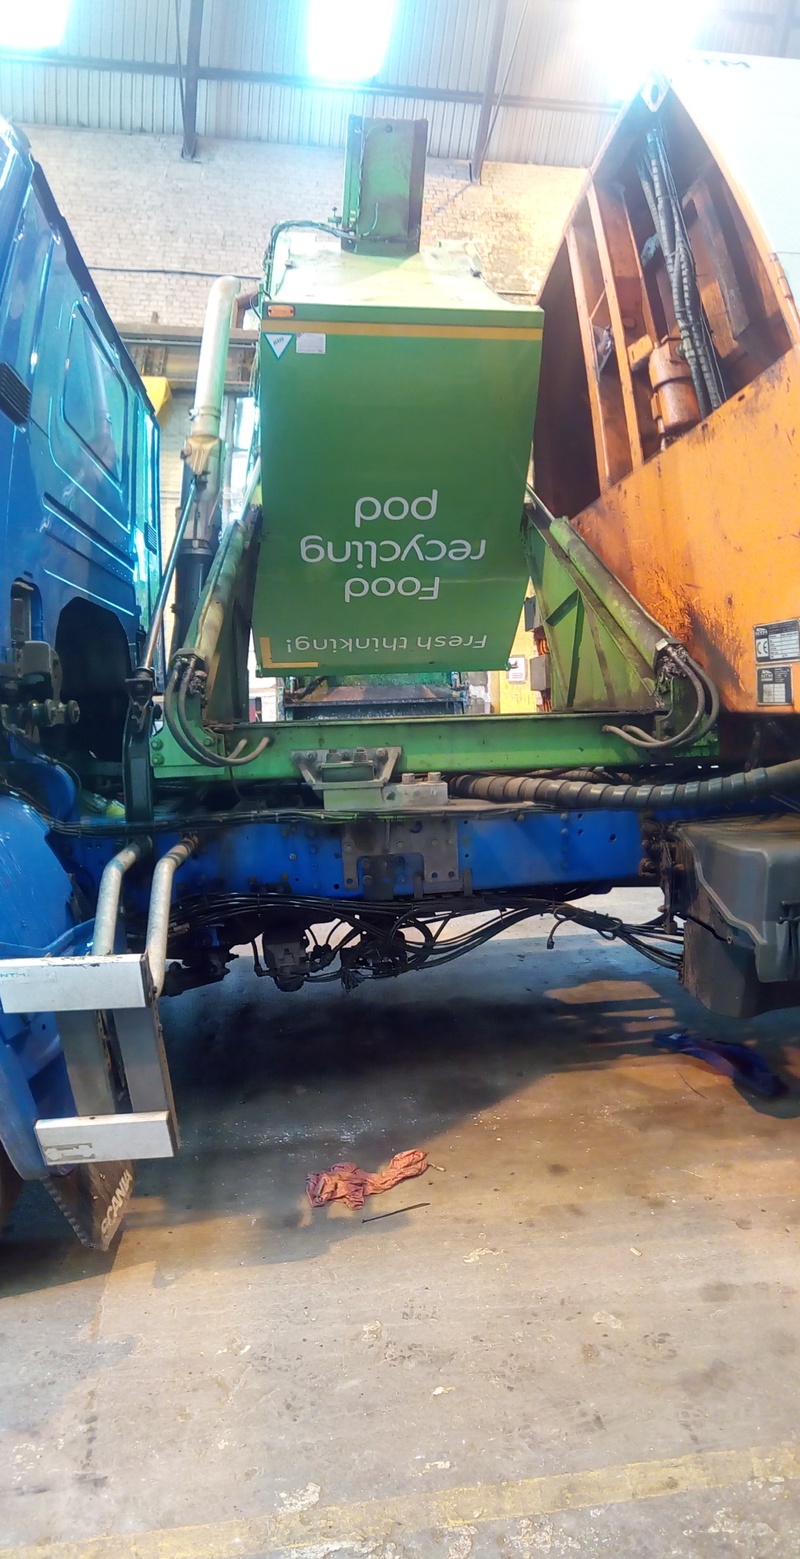 Fully-tipped truck-mounted recycling pod viewed from passenger side of truck